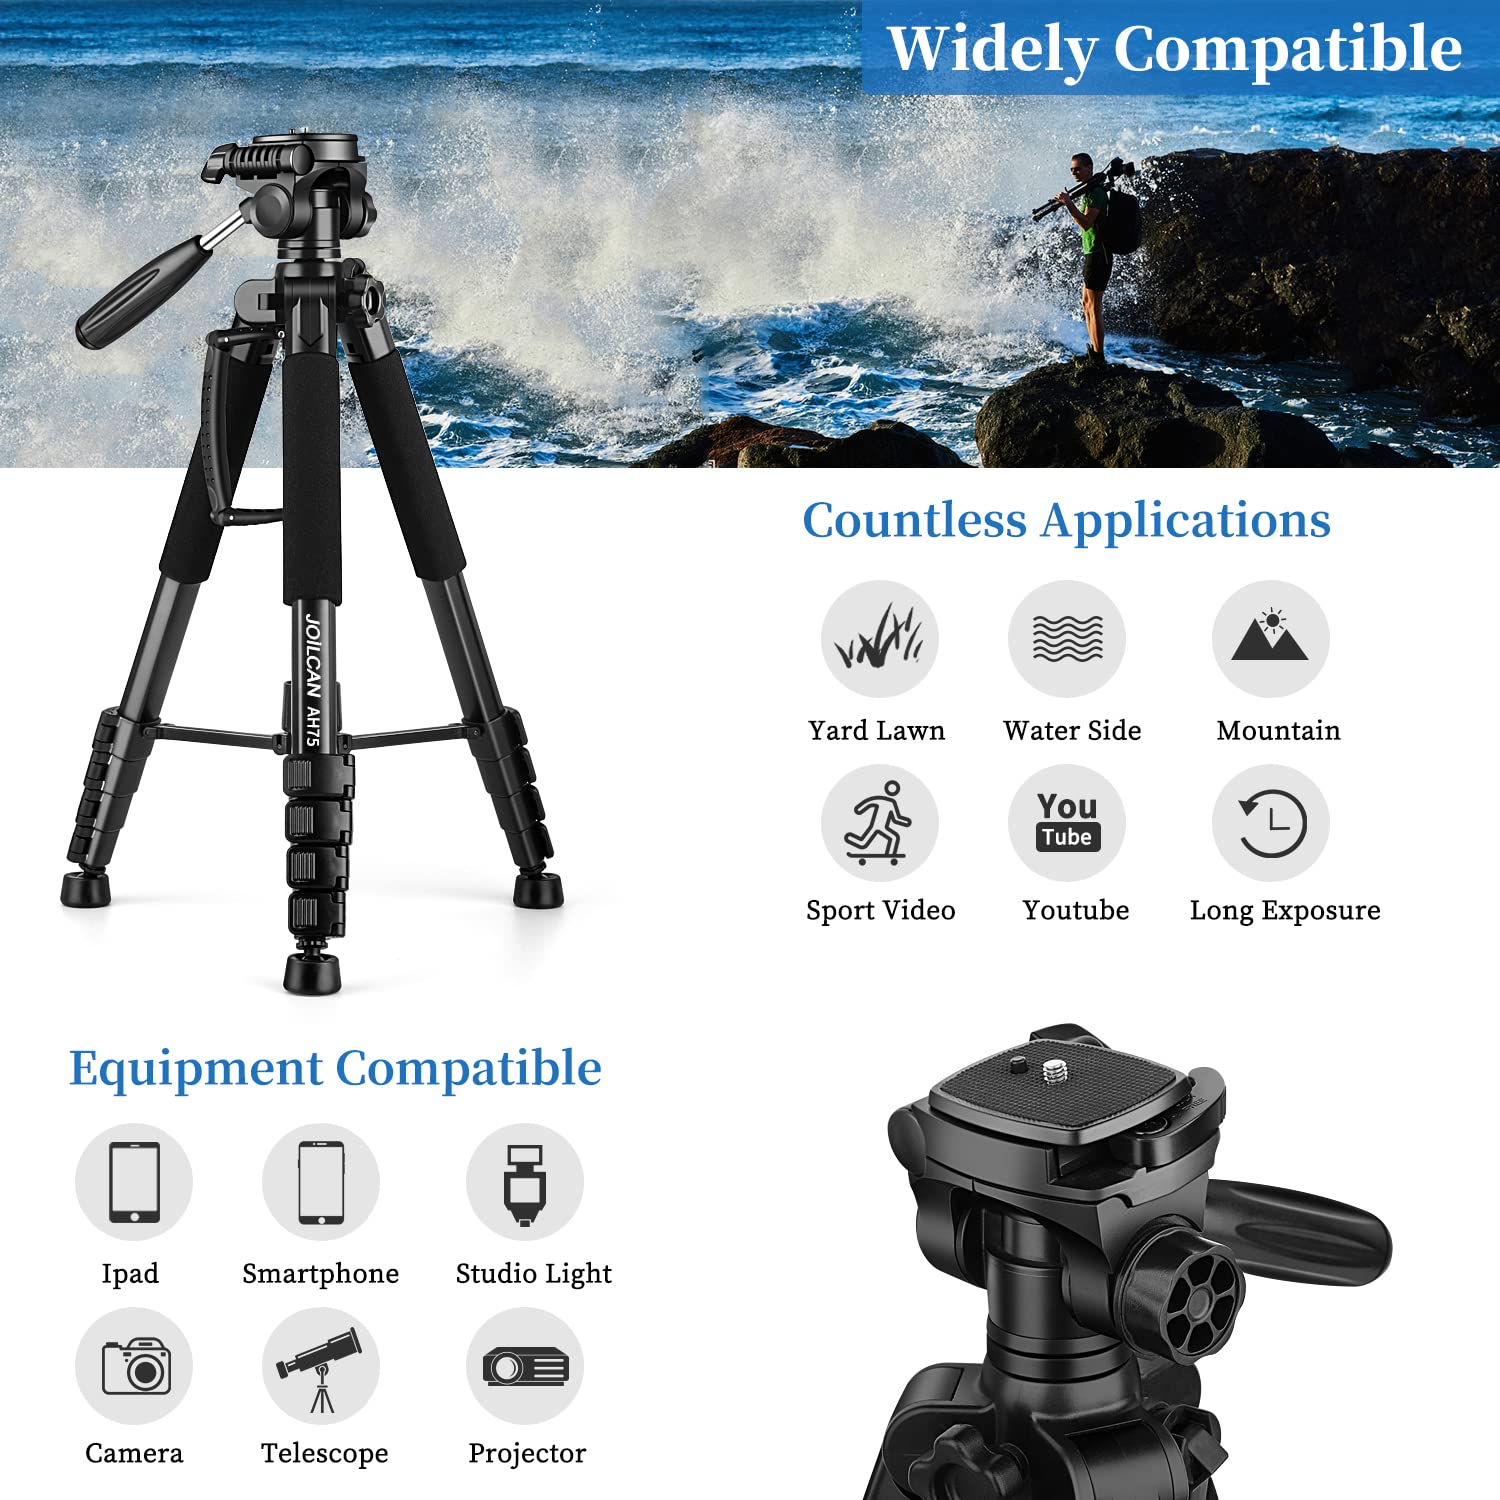 JOILCAN Camera Tripod for Canon Nikon, 74" Lightweight DSLR Tripod Camera Stand with Detachable Head and Universal Phone Mount, Reinforced Aluminum Tall Tripod for Vlog Live Streaming Max Load 14LB